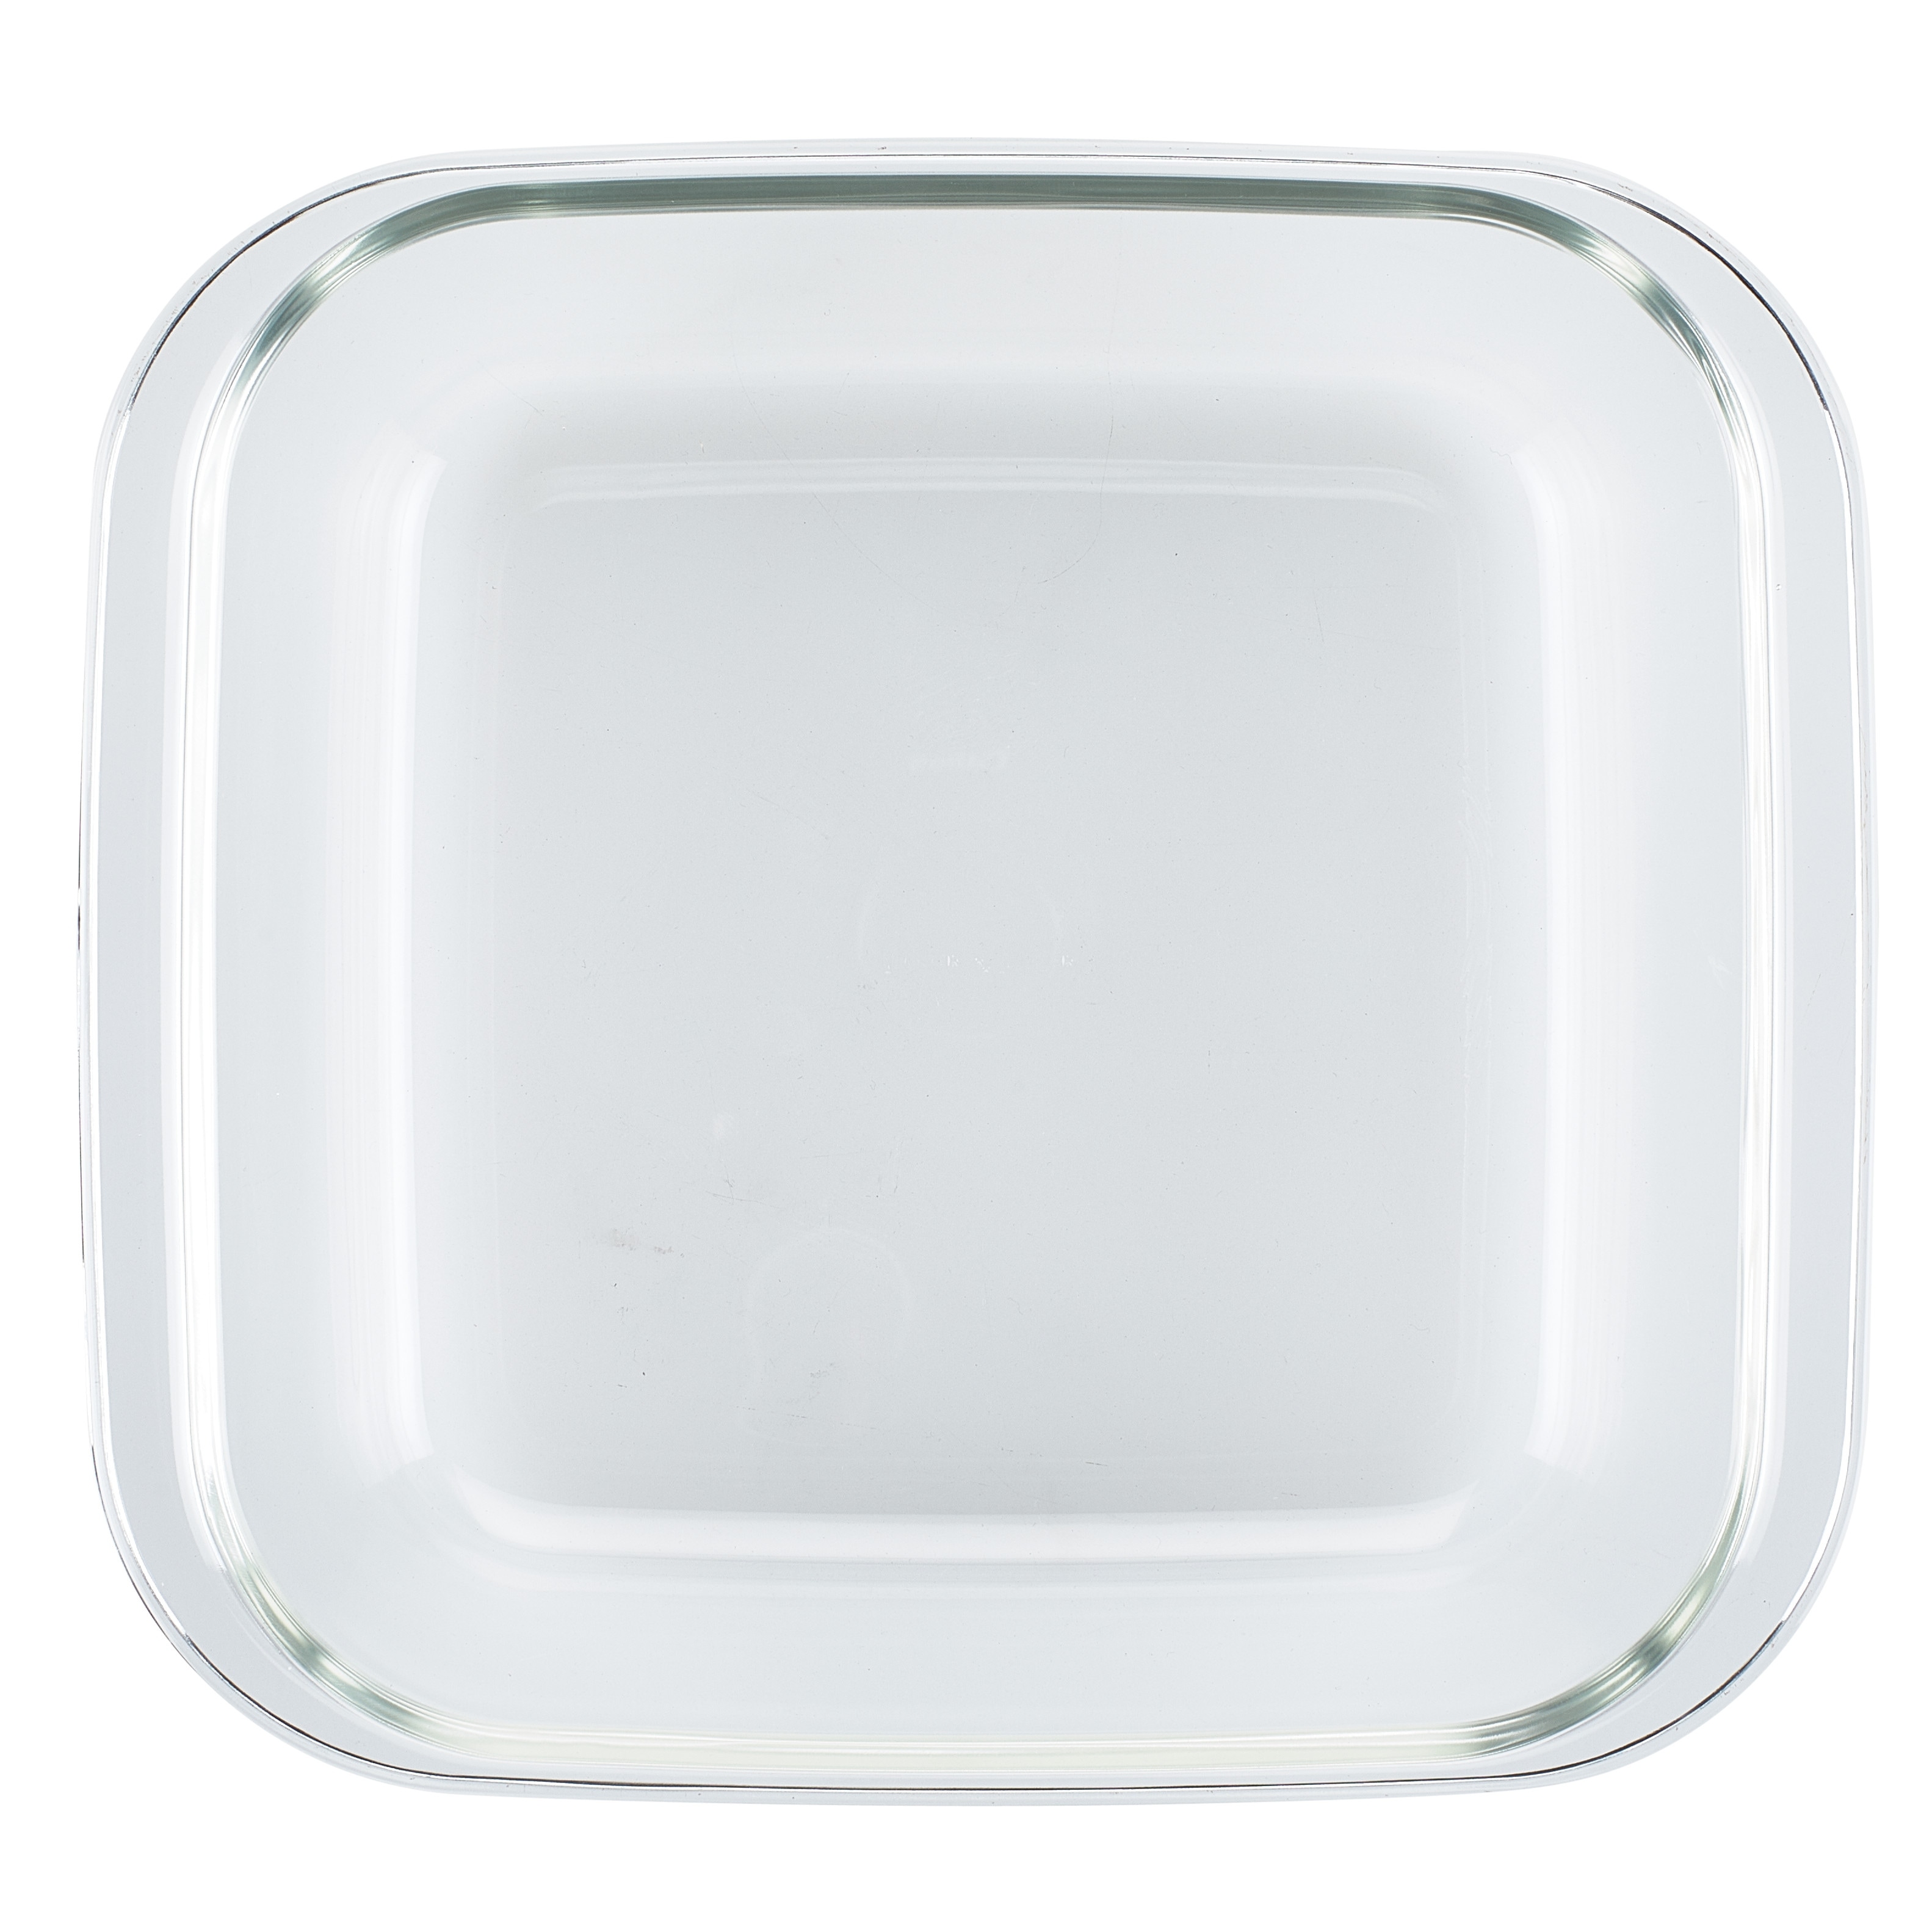 https://ak1.ostkcdn.com/images/products/is/images/direct/c2fb7d76b41f7760a7f490ad50e2a81833a933b3/LocknLock-Purely-Better-Glass-Square-Baker-and-Food-Container-with-Lid%2C-8-inch-x-8-inch.jpg